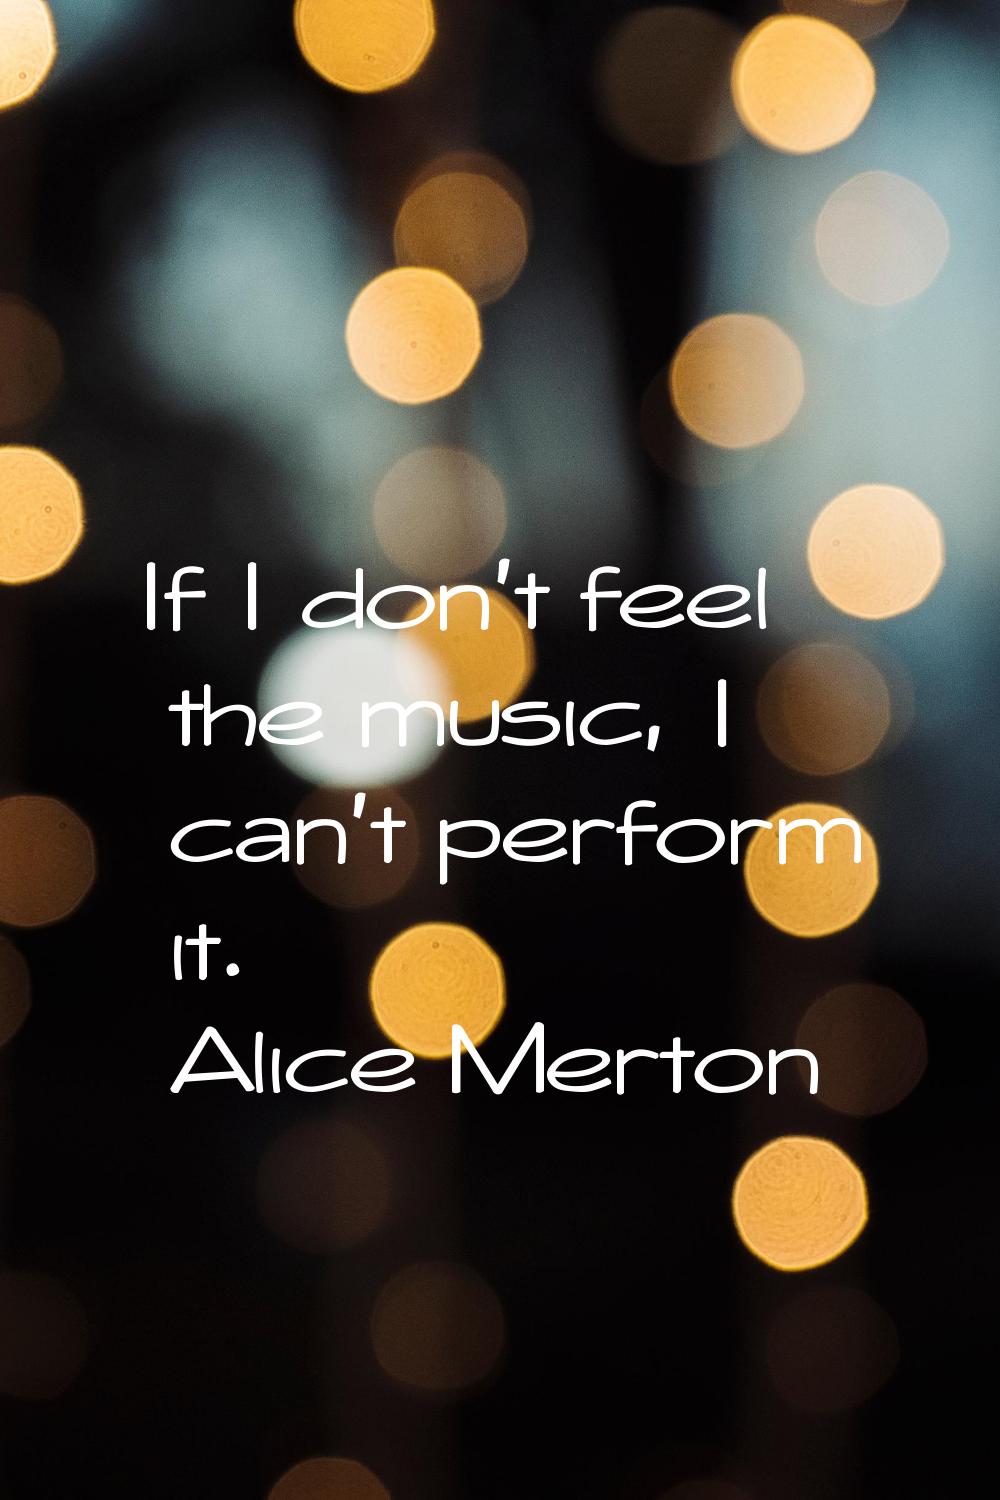 If I don't feel the music, I can't perform it.